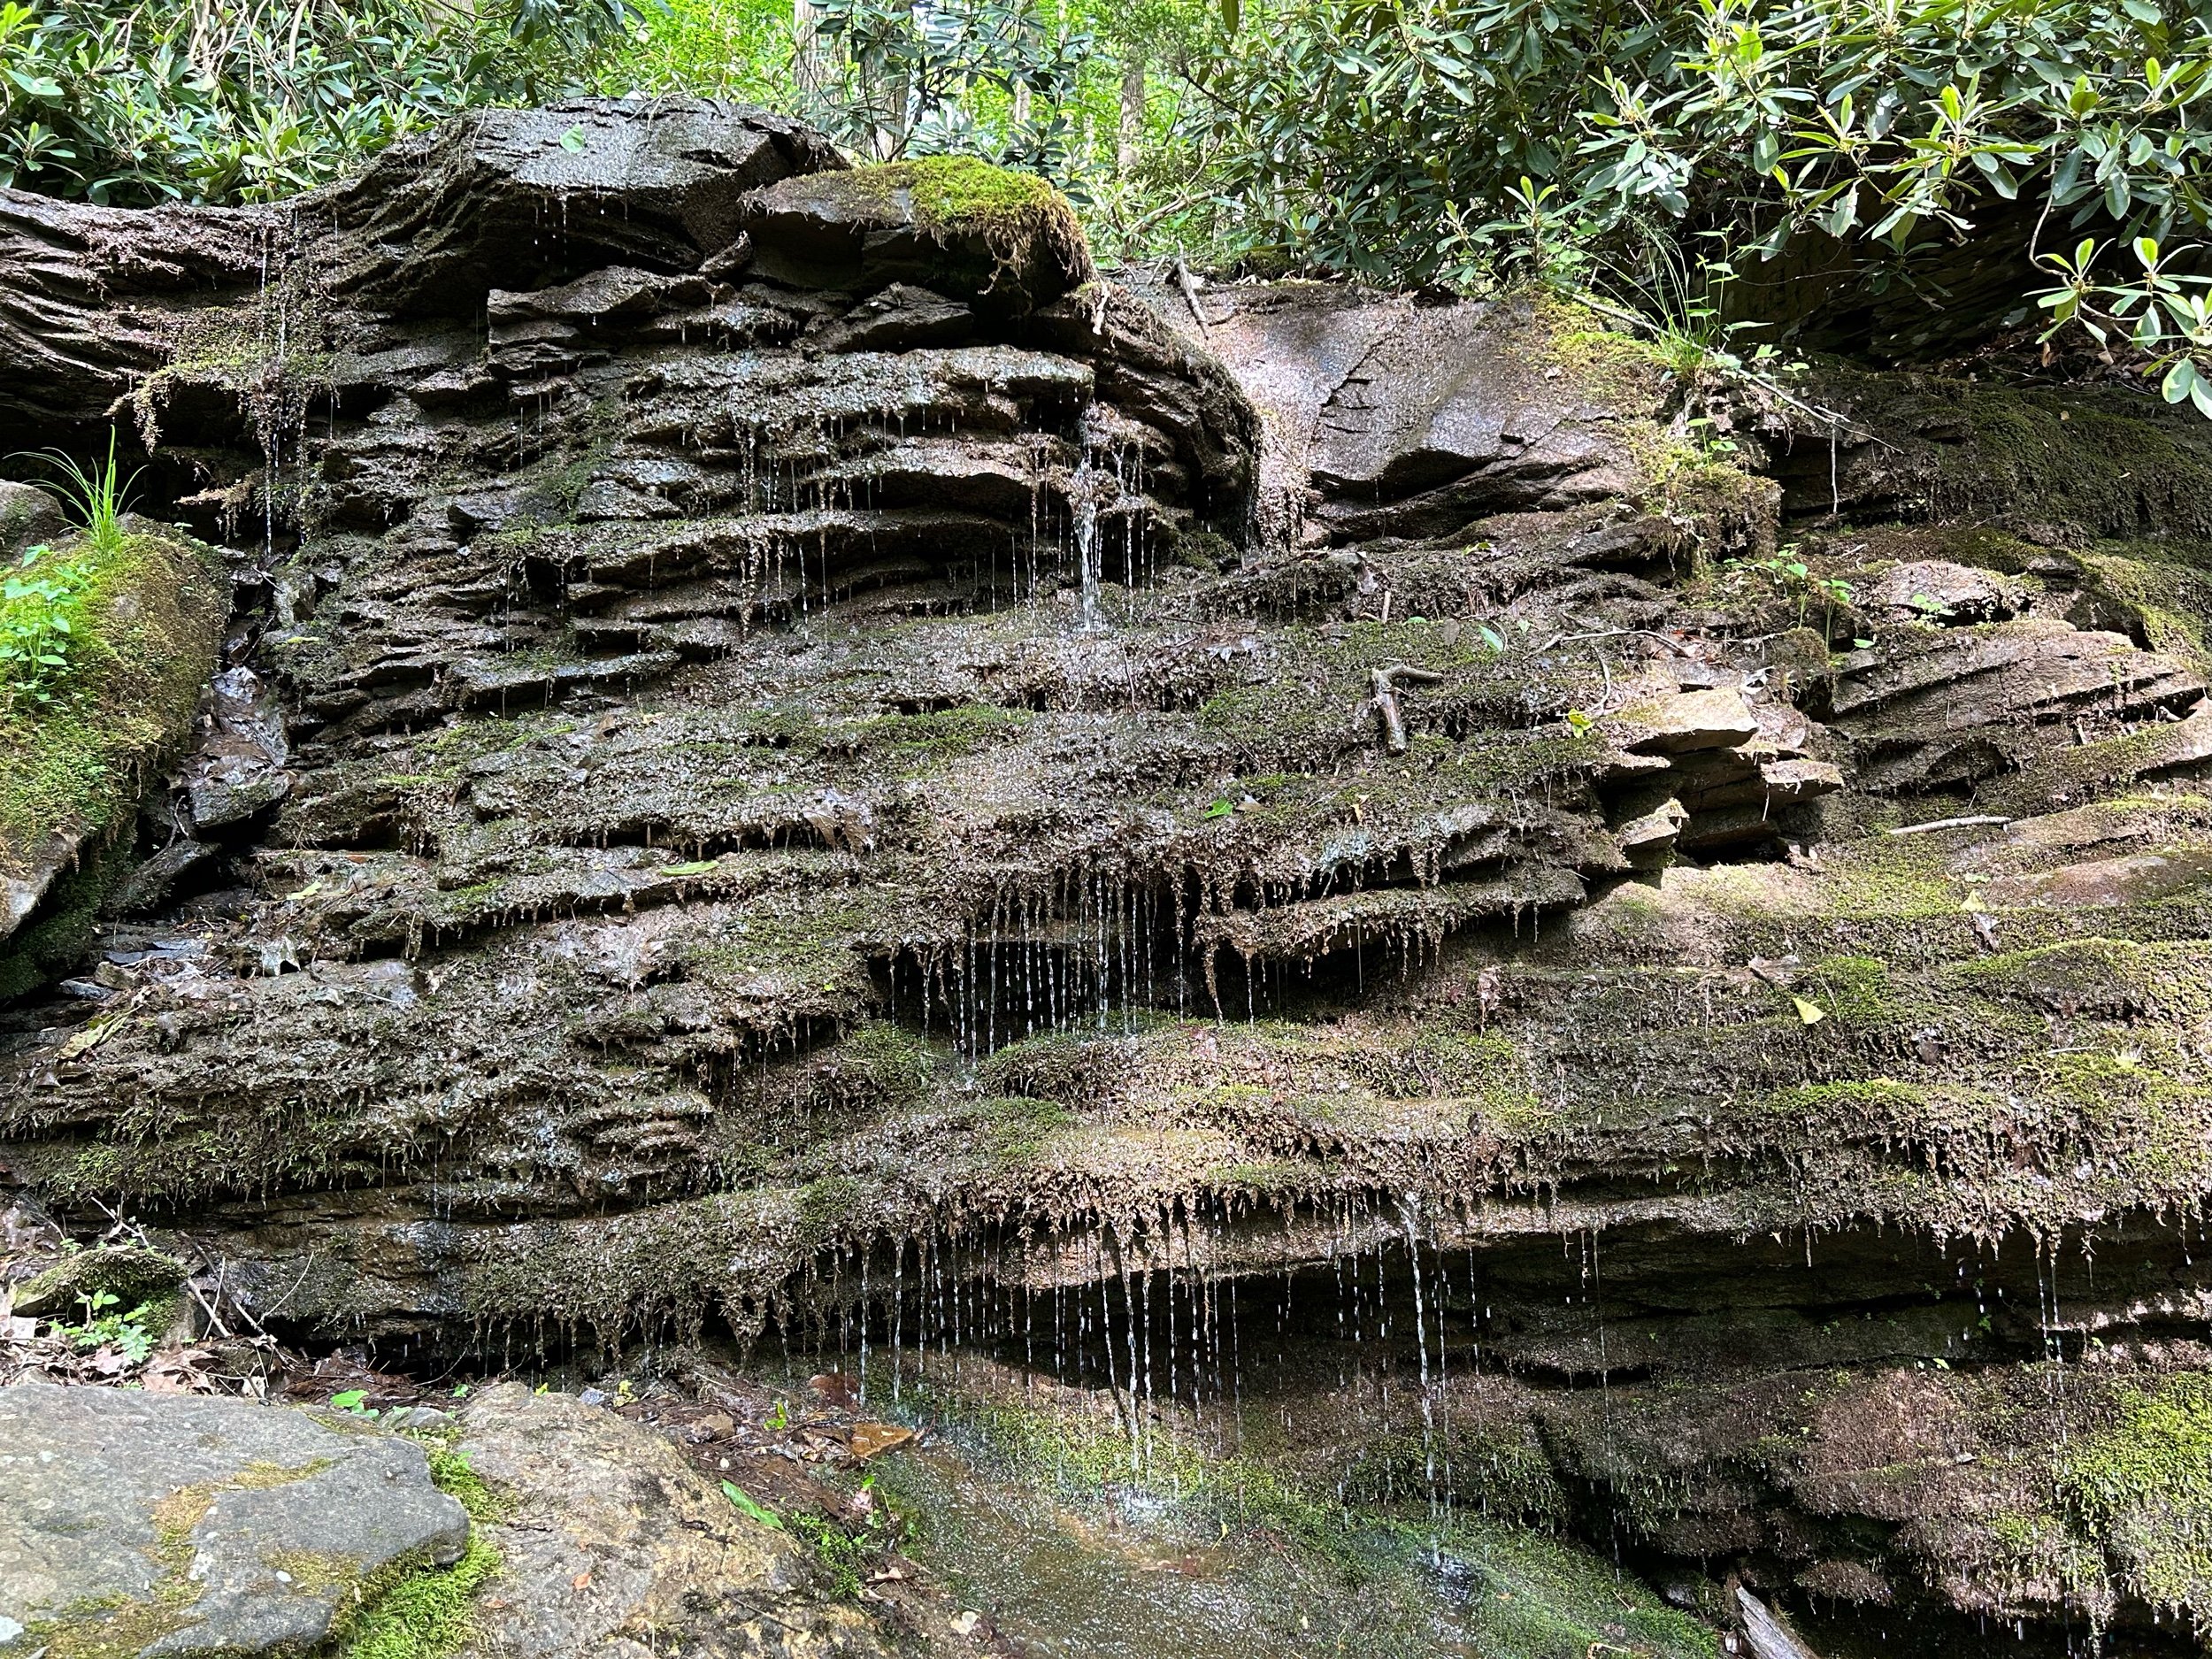  A small drippy waterfall over multilayered shale (?) rock formations and a lot of greenery 